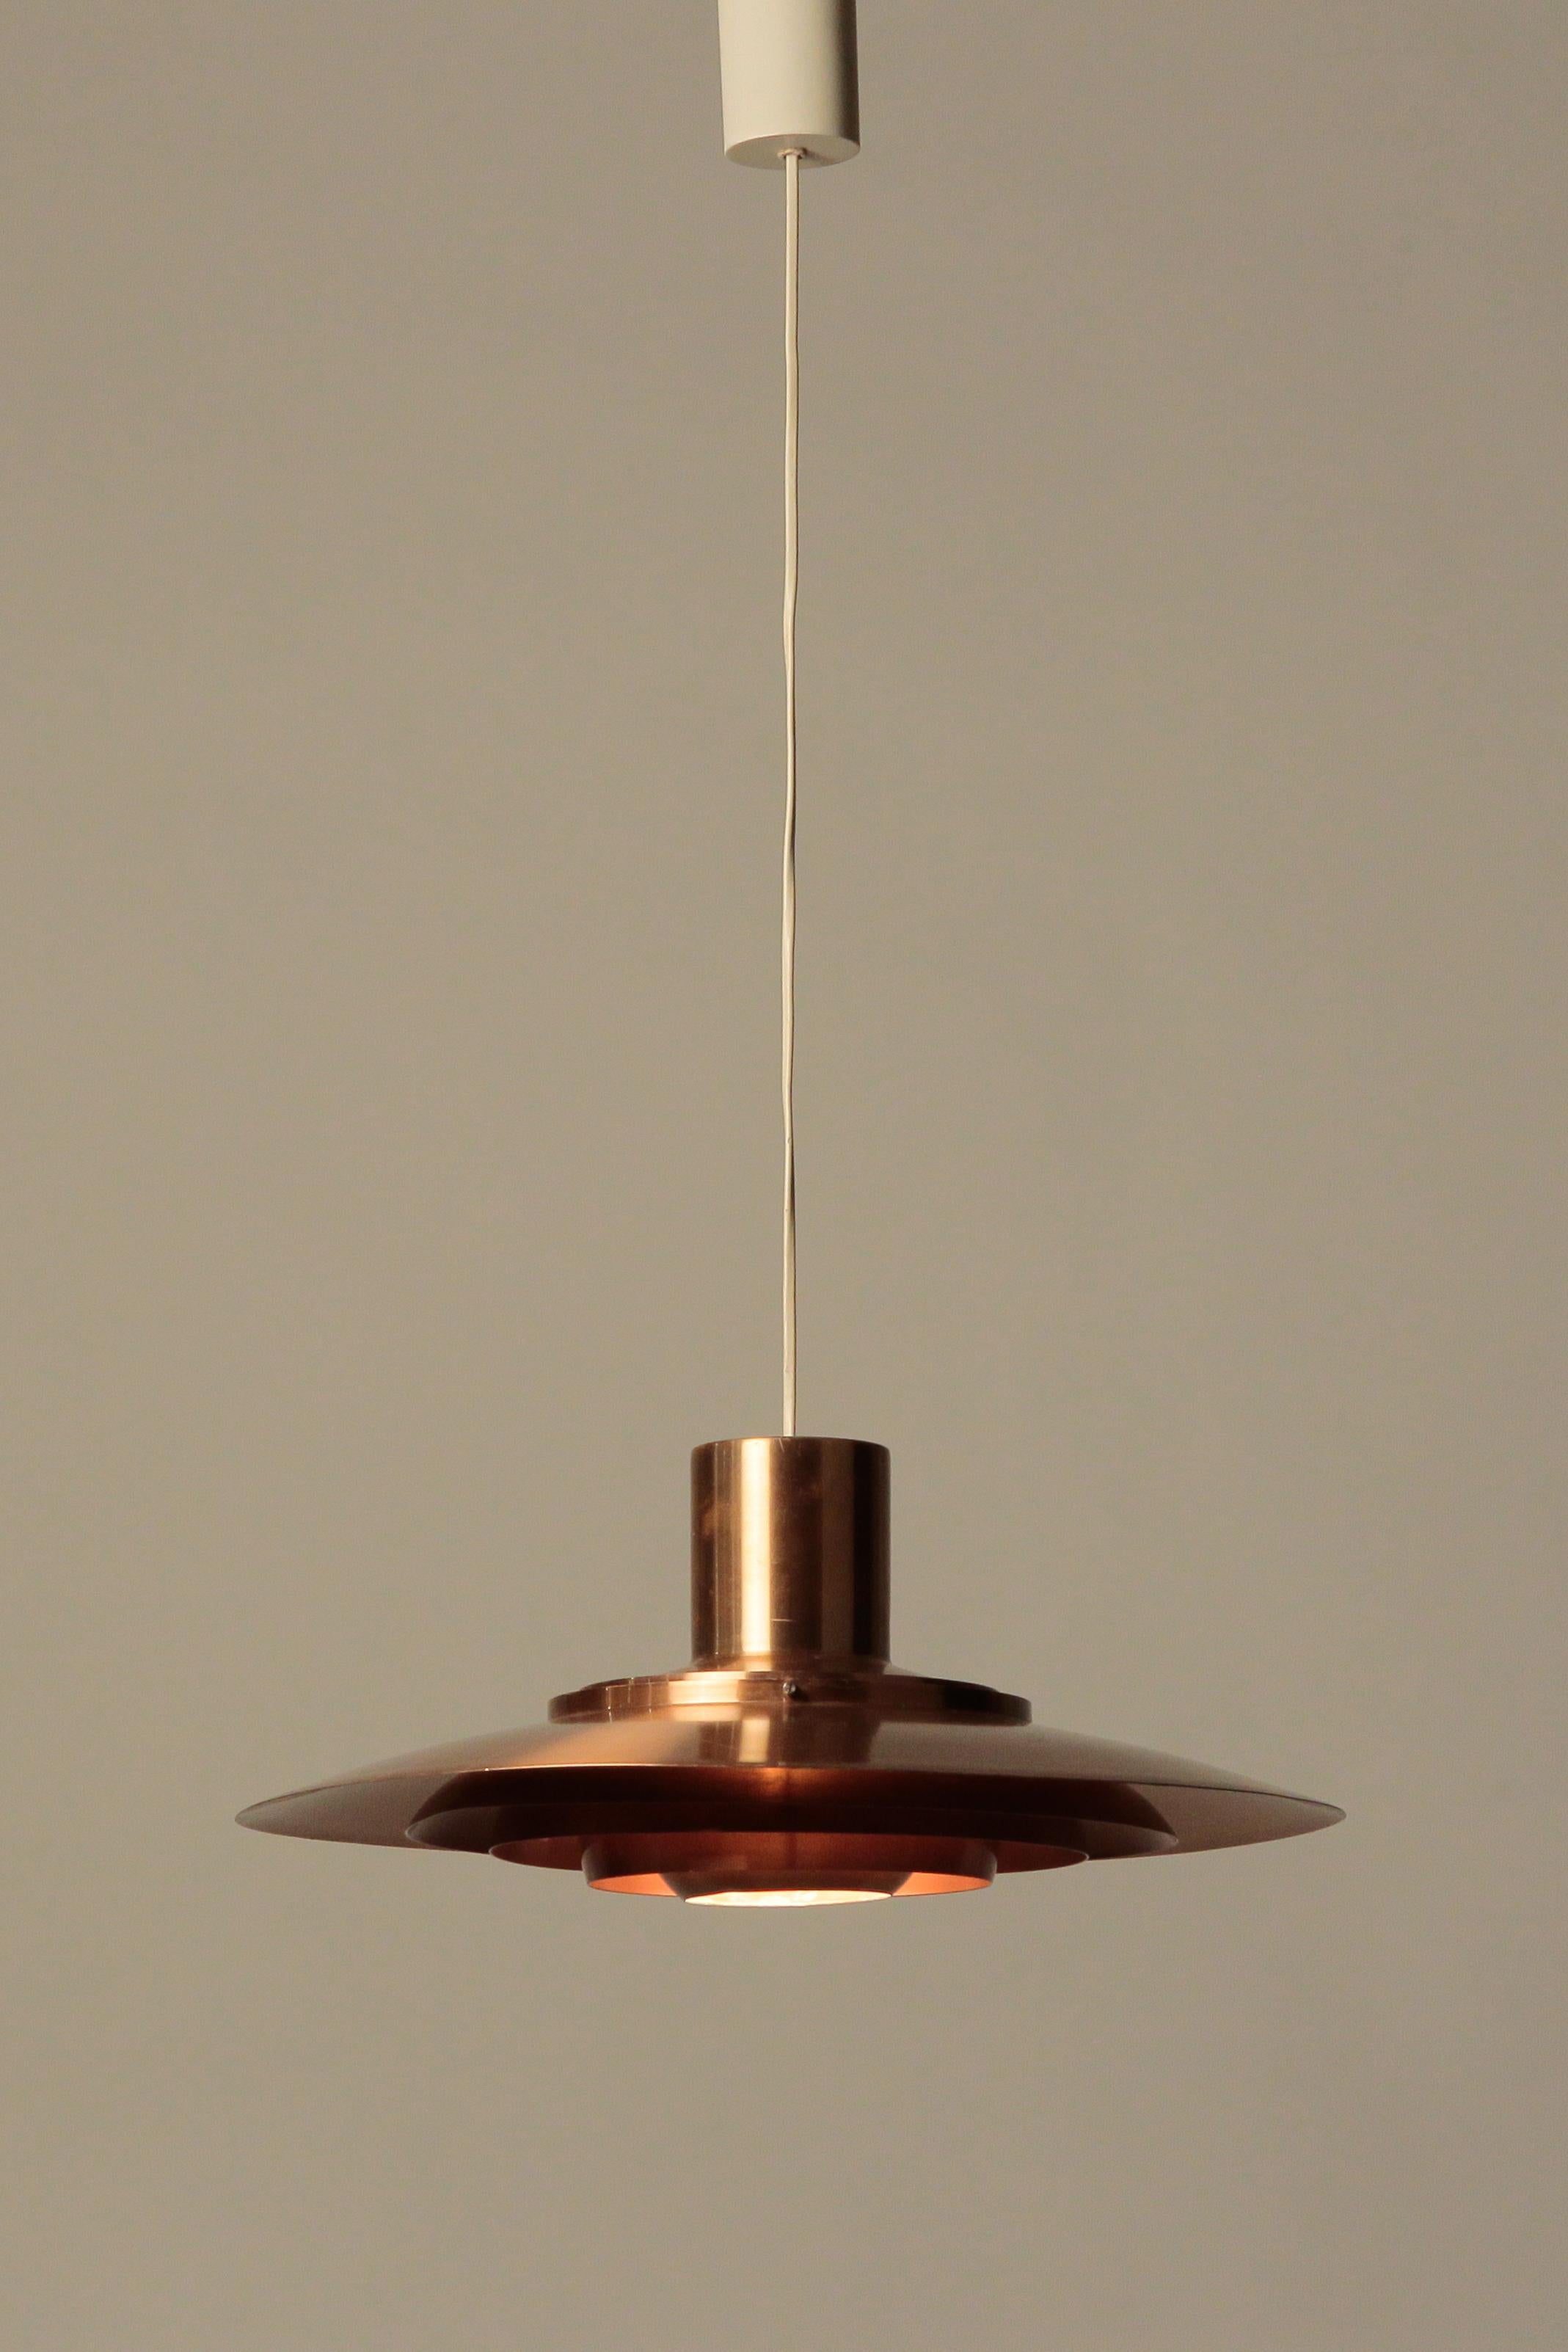 Medium Fabricius & Kastholm ceiling lamp, copper. Design 1964, manufactured by Nordisk Solar in Denmark. Gives off a very warm light.